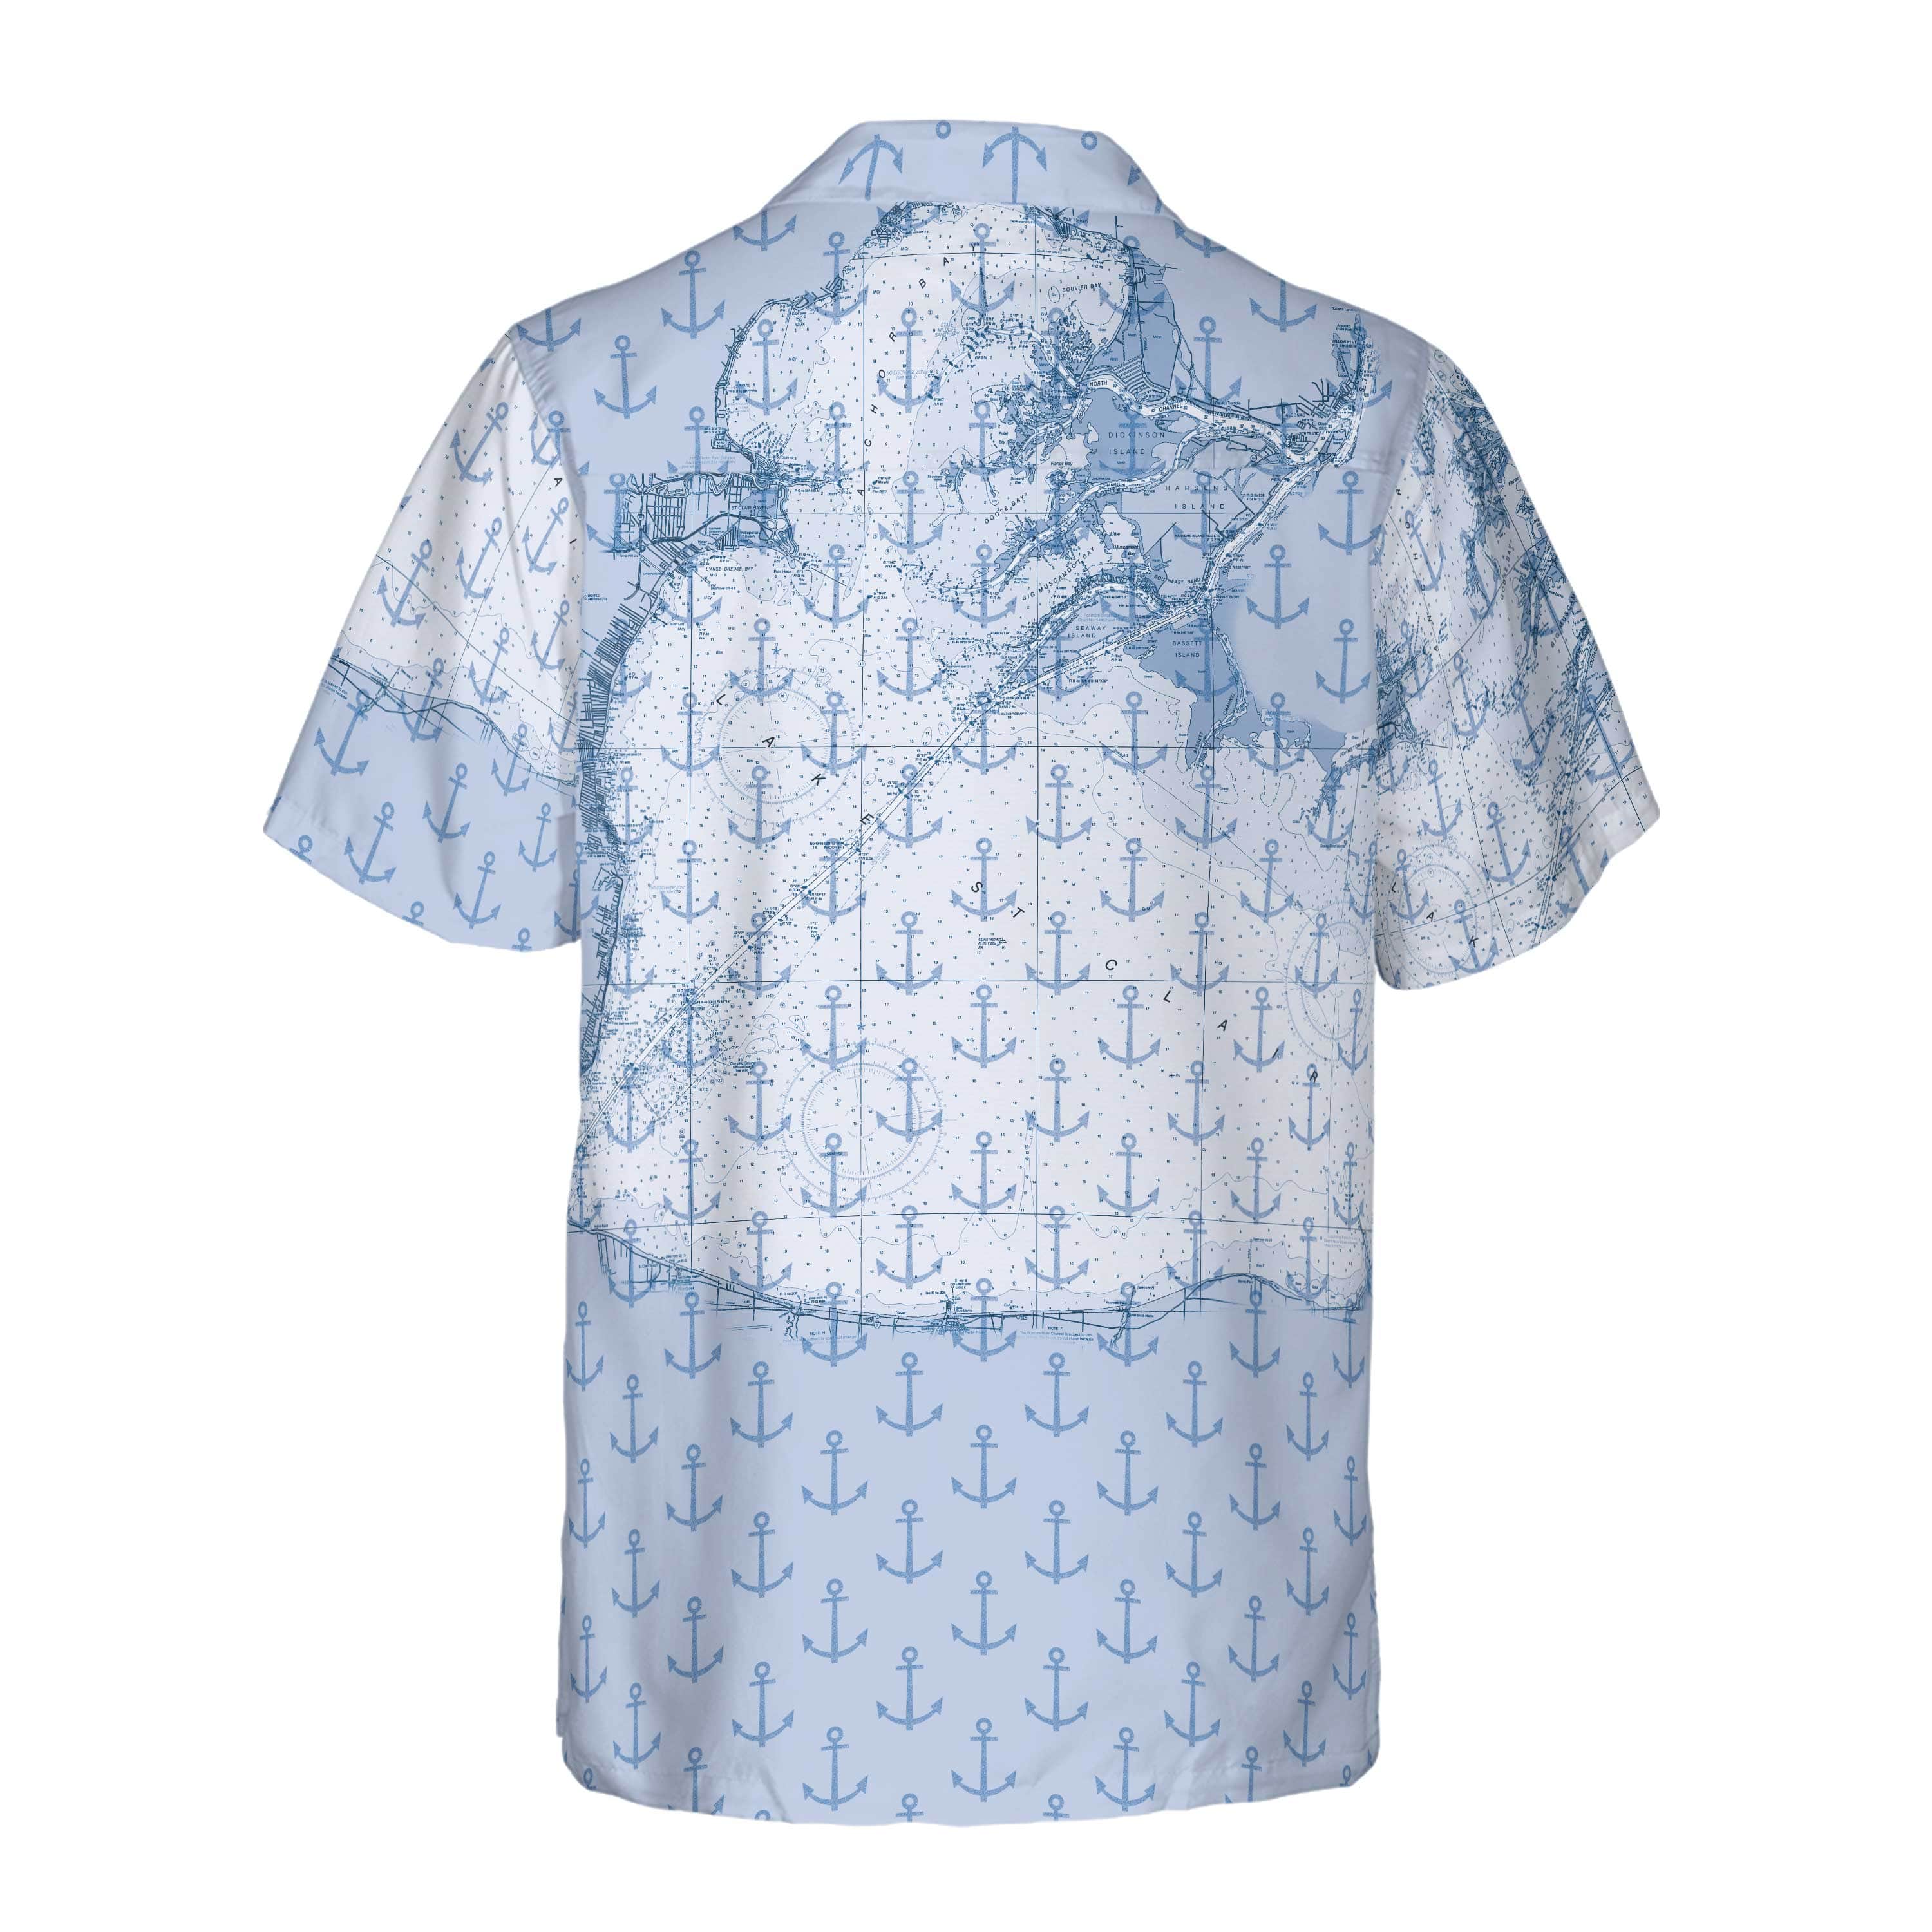 The Lake St. Clair Anchored in Blue Coconut Button Shirt